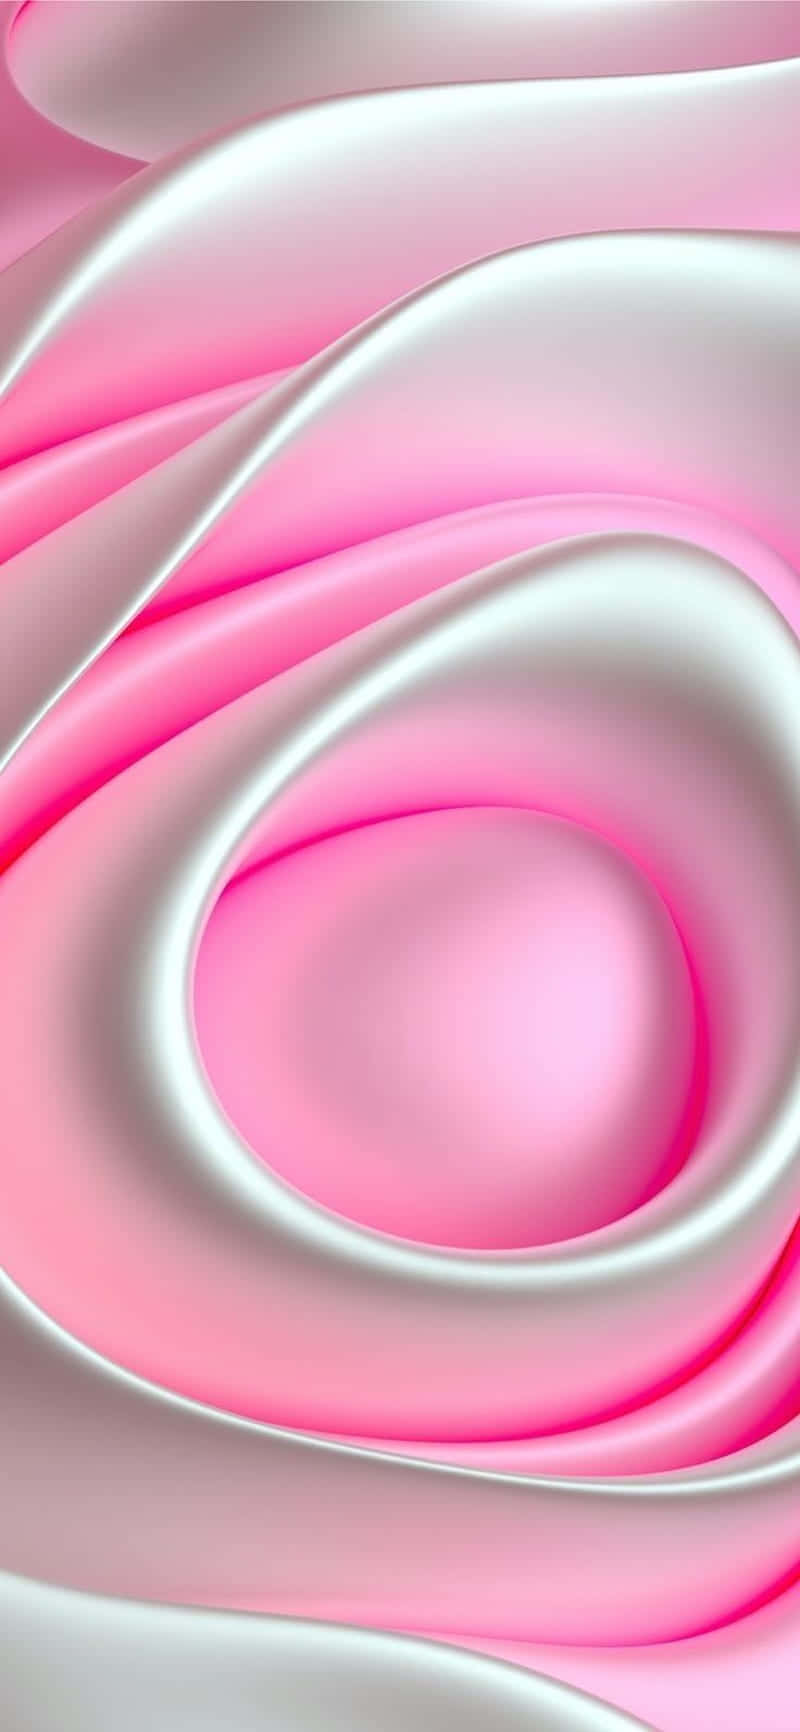 Download Pink And White Abstract Background Wallpaper